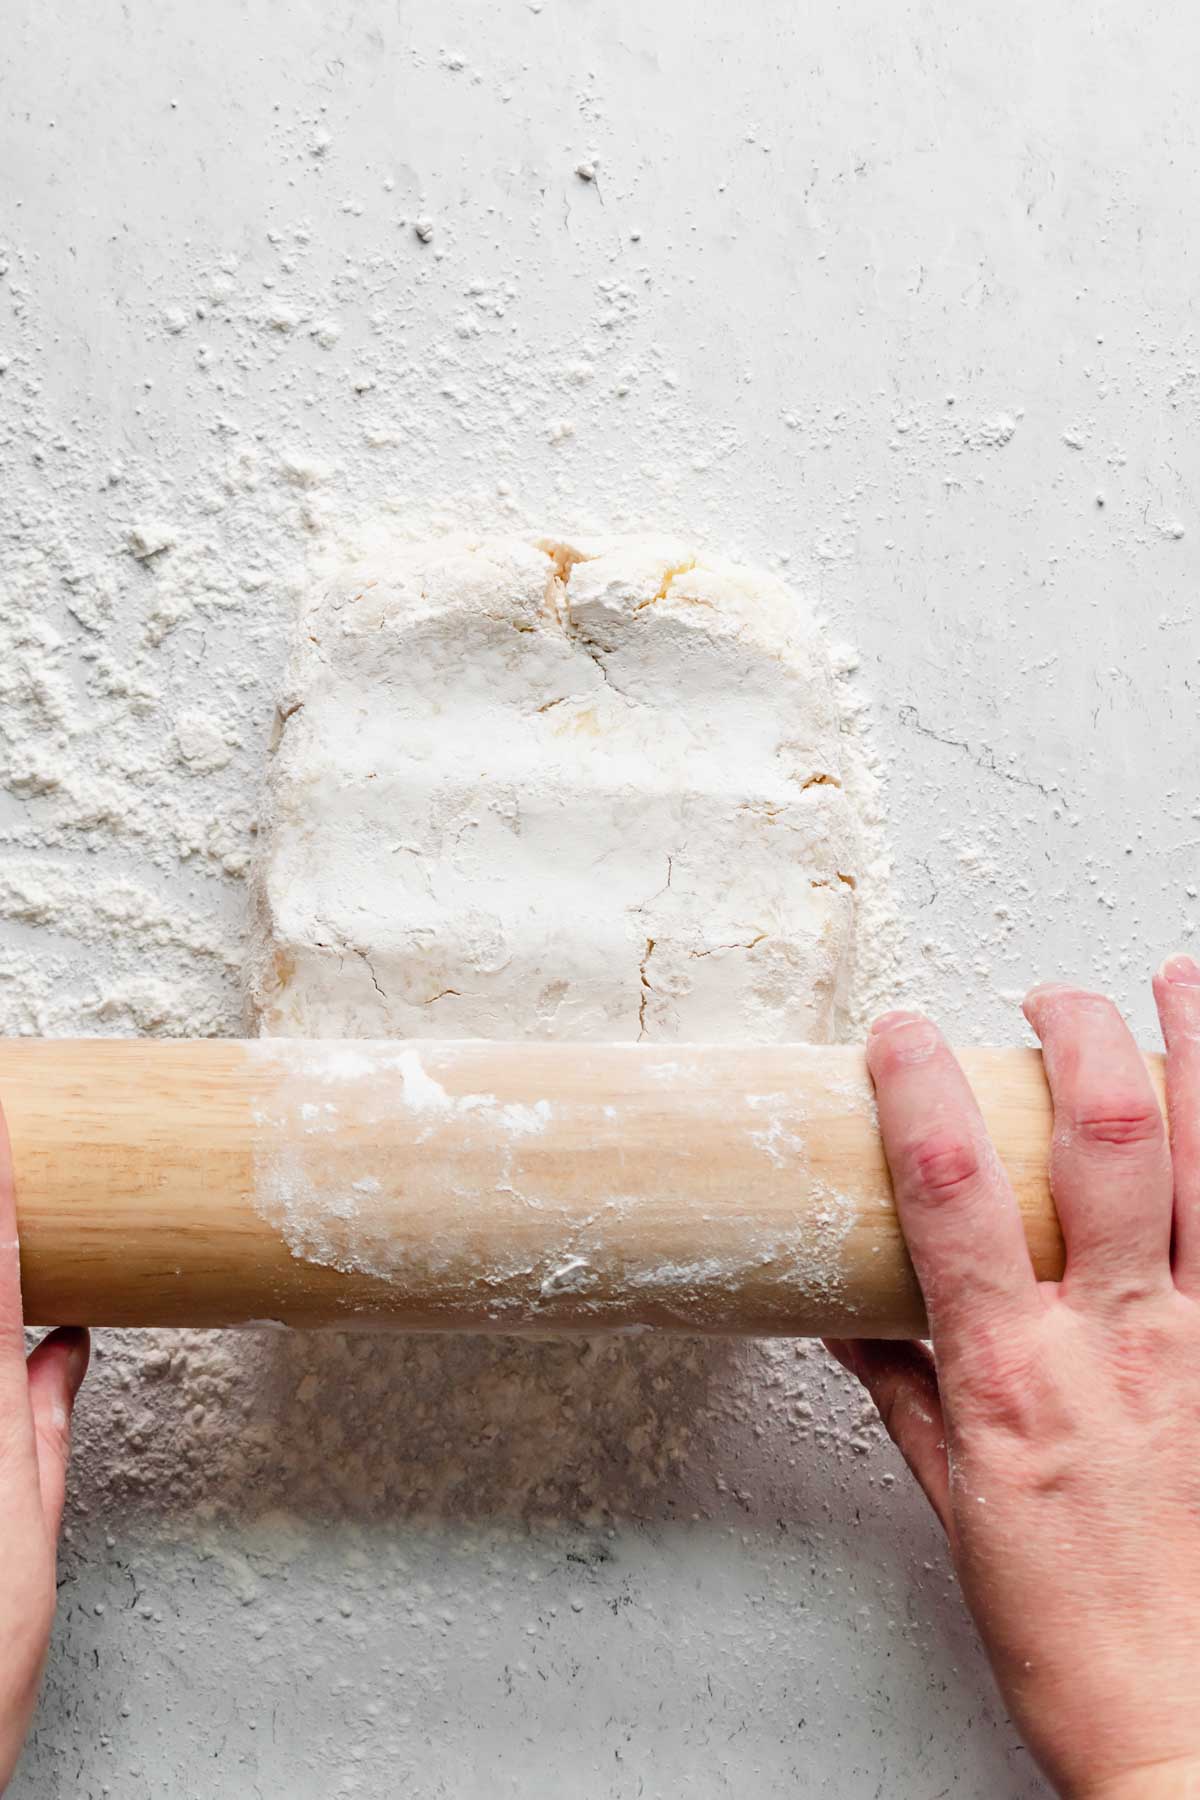 A floured rolling pin begins to roll out the dough.